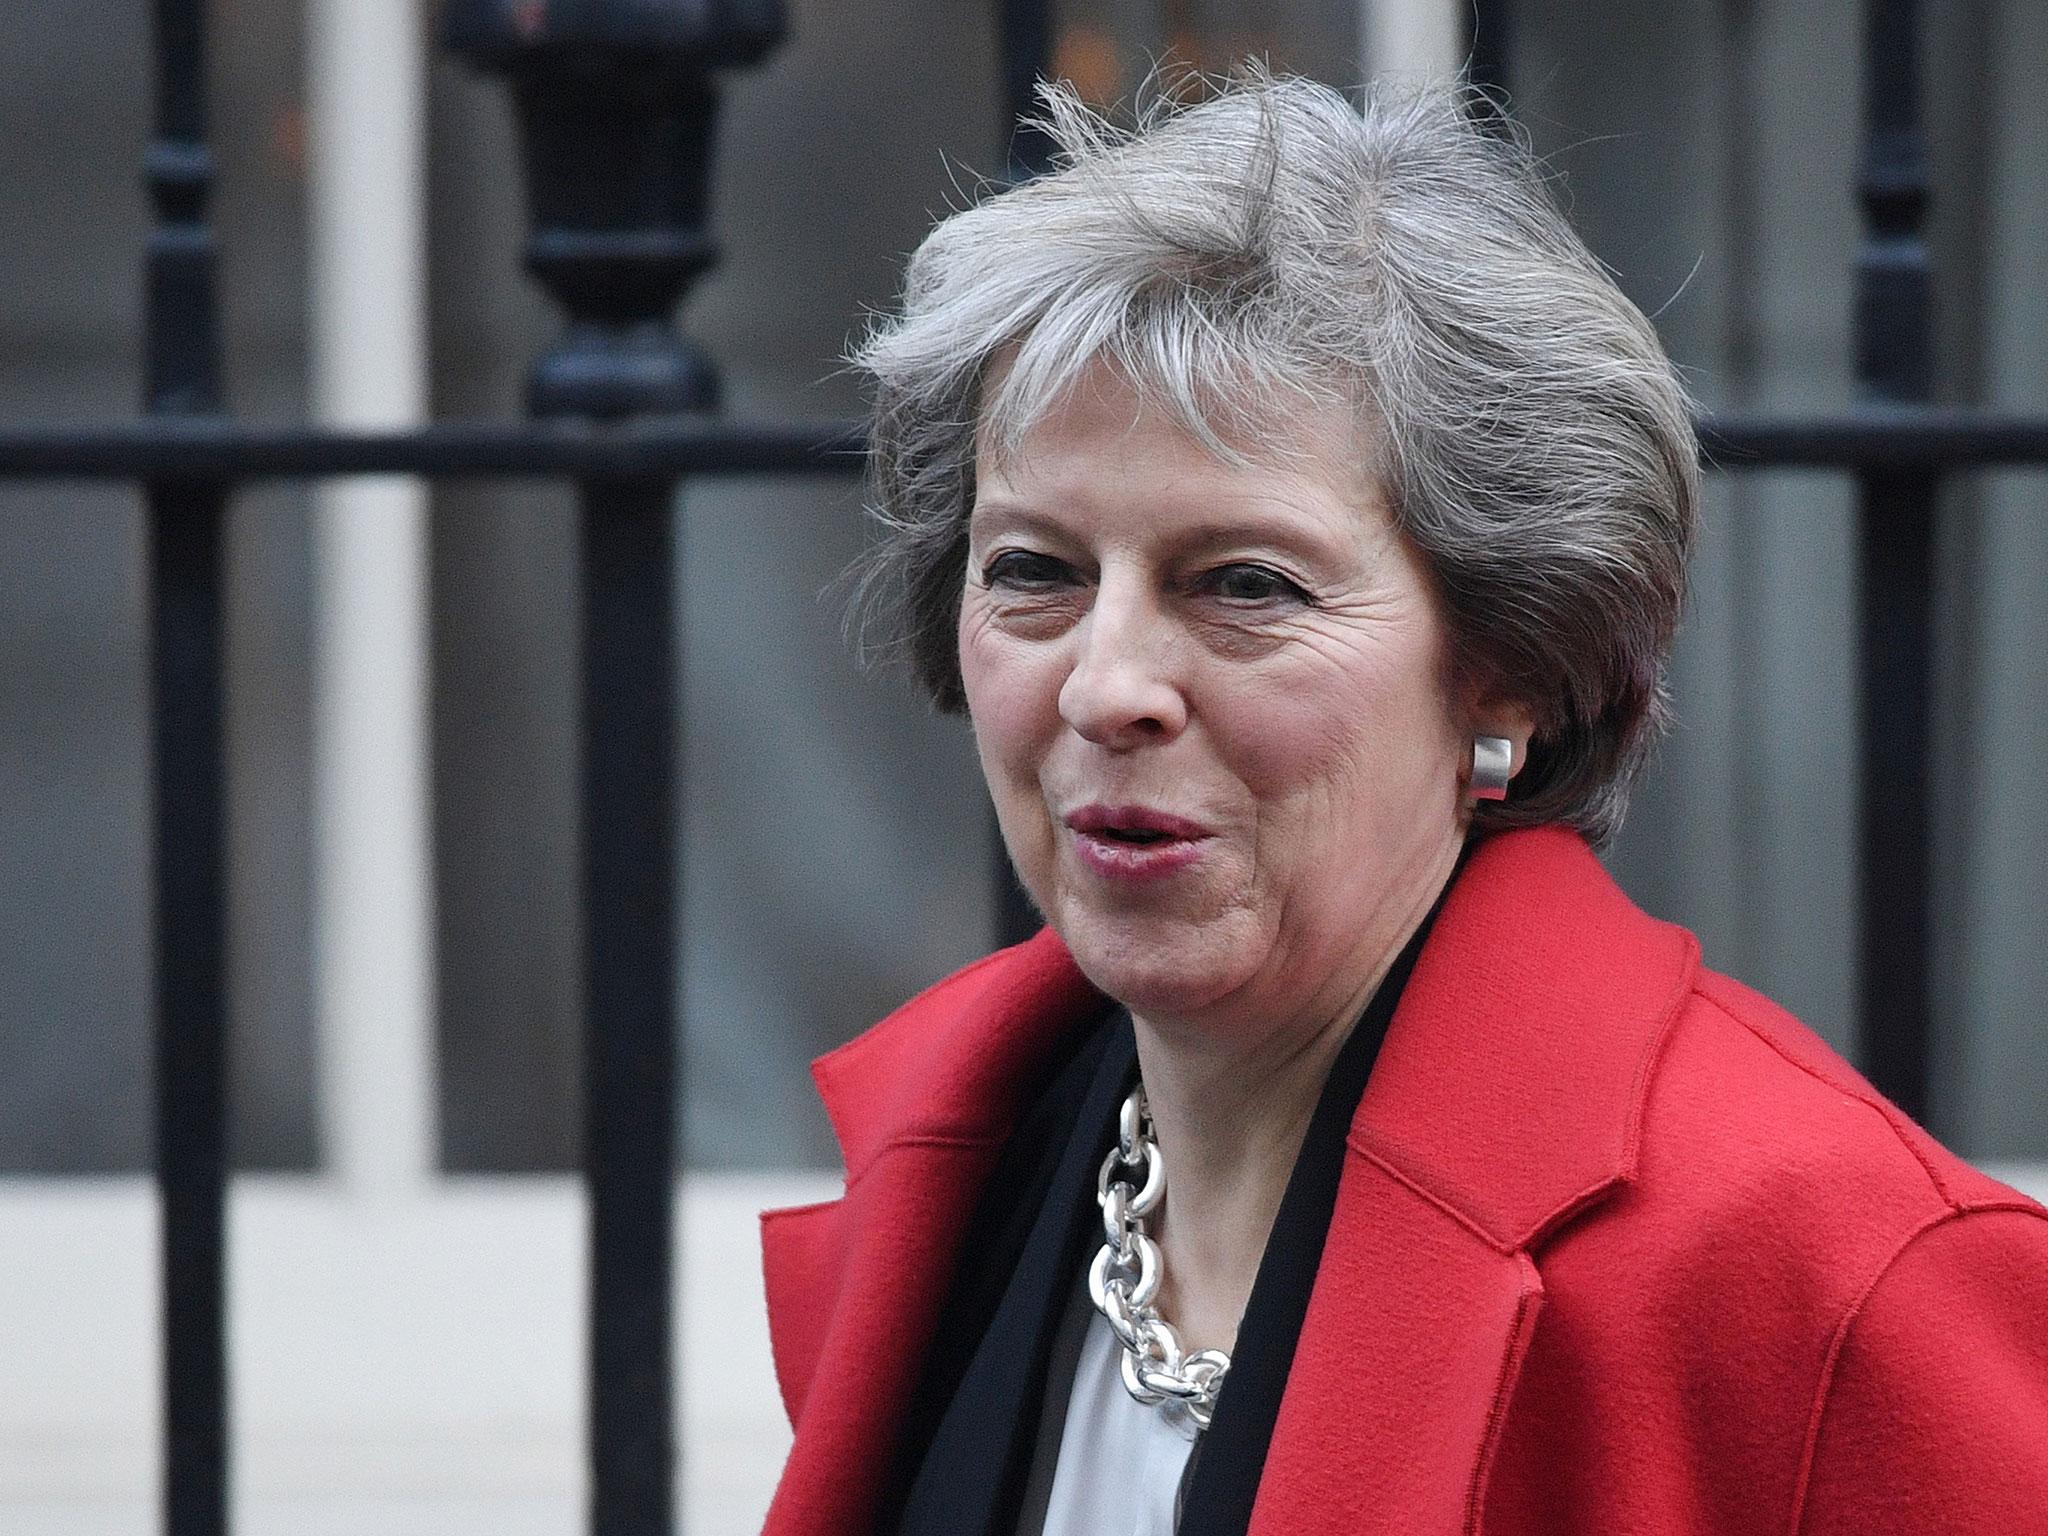 Theresa May leaves Downing Street for Prime Minister's Questions in the Commons